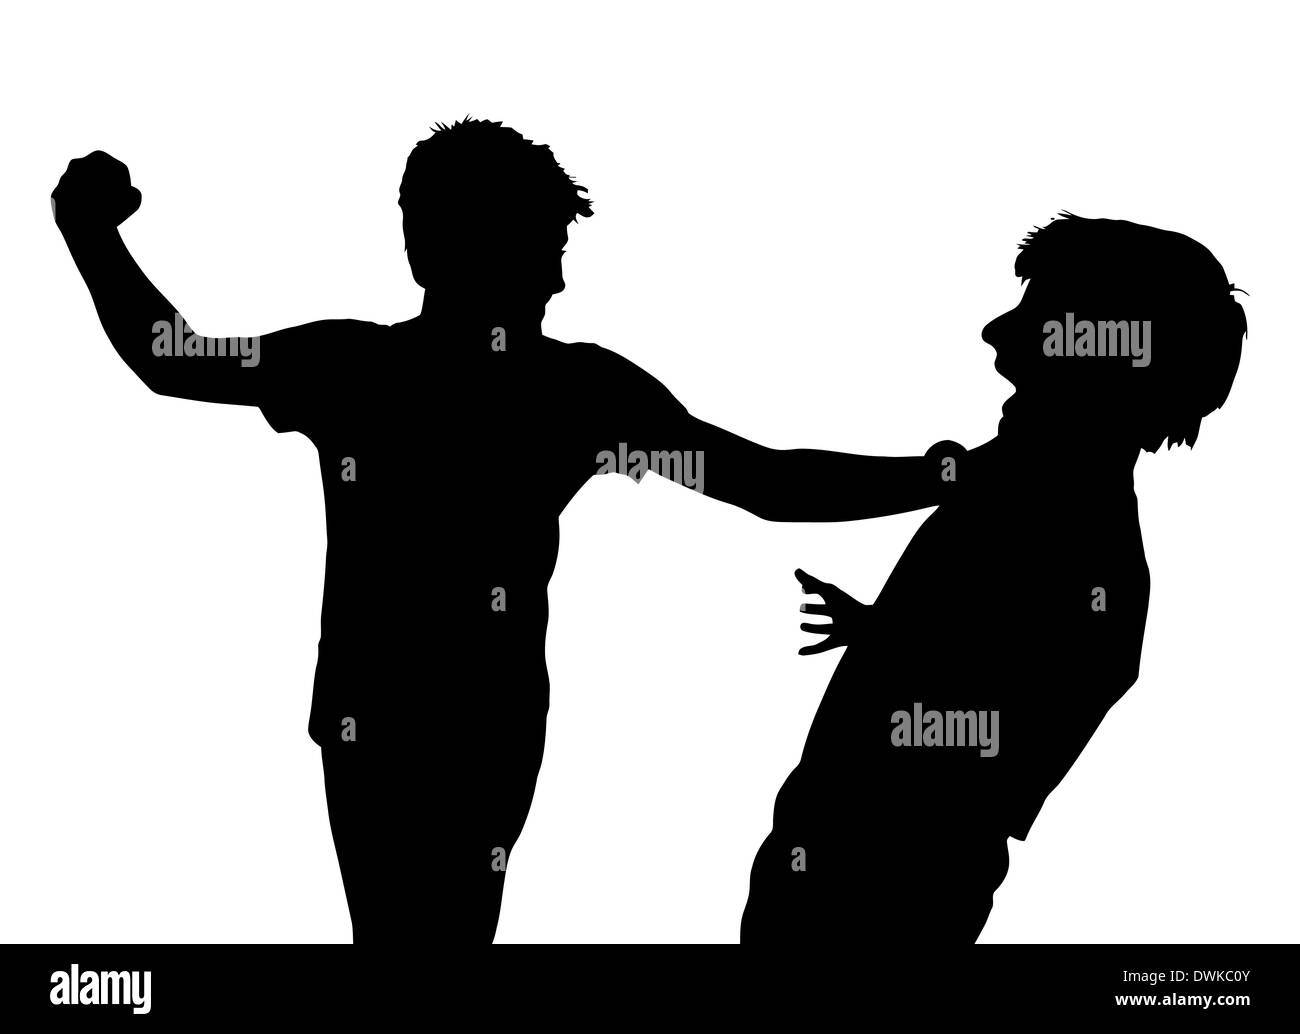 Image of Teen Boys In Fist Fight Silhouette Stock Photo